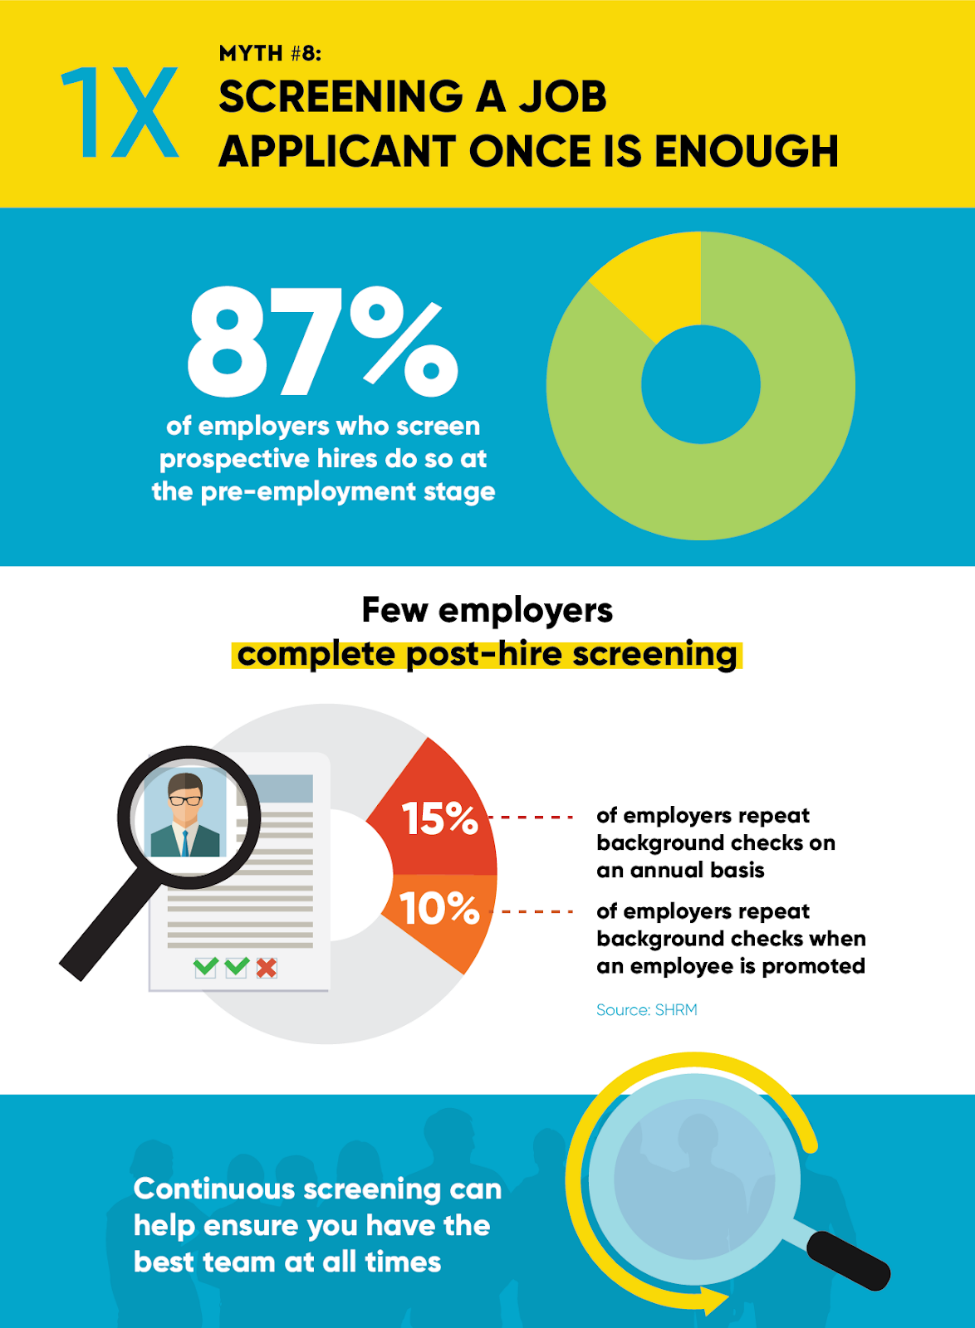 Infographic highlights employment myth that reads “Screening a job applicant once is enough”